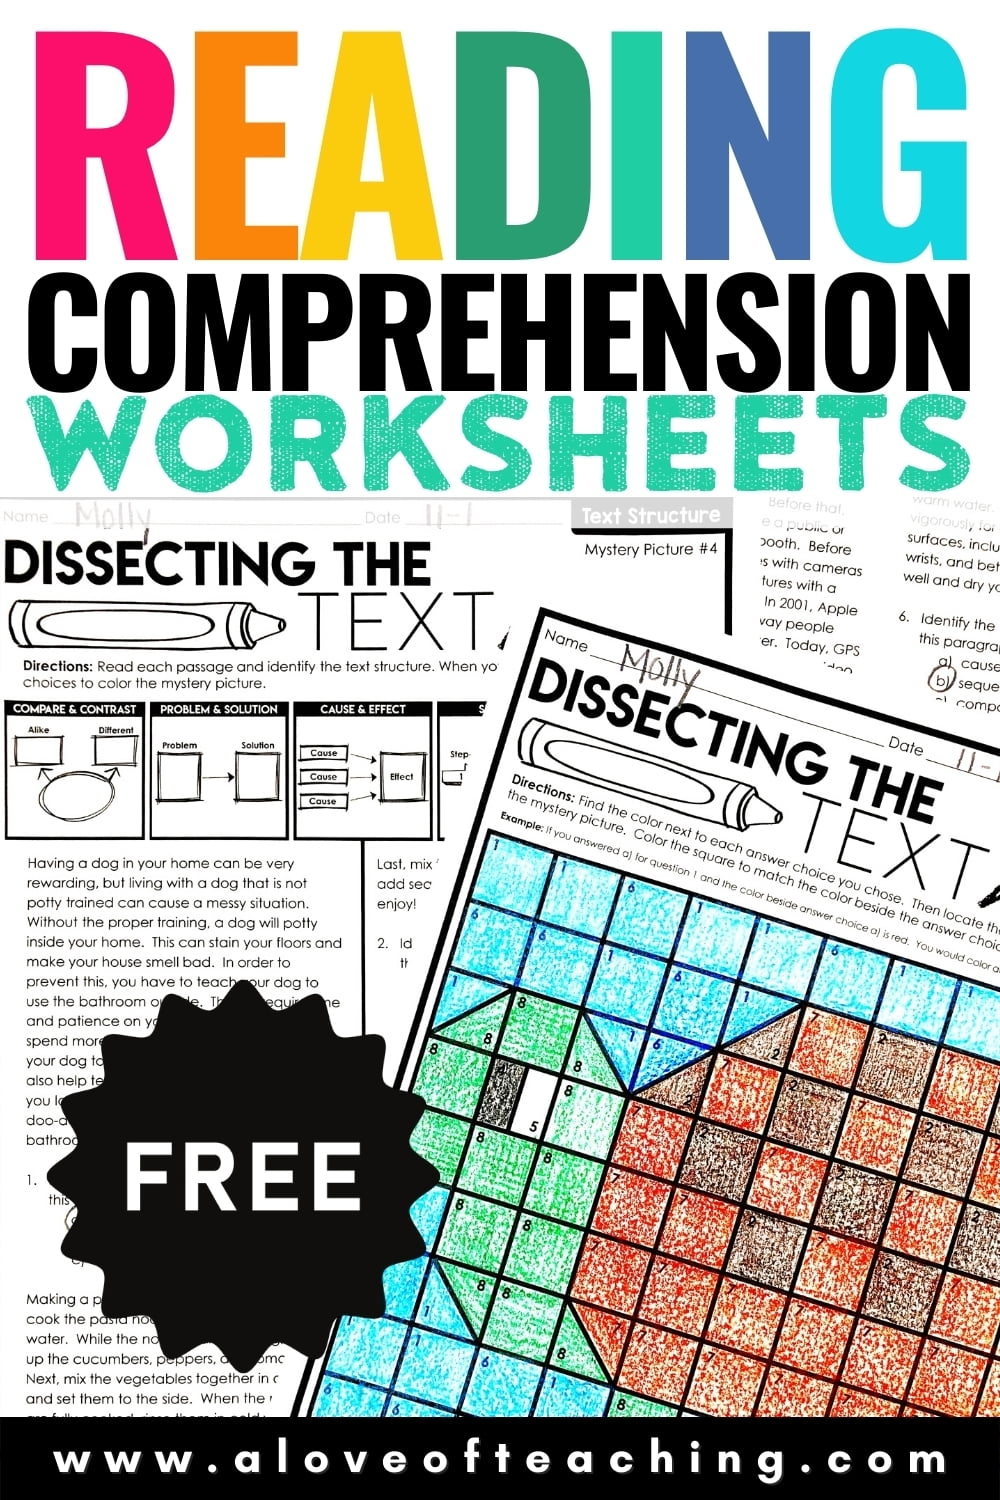 FREE Reading Comprehension Practice Worksheets A Love Of Teaching Kim Miller